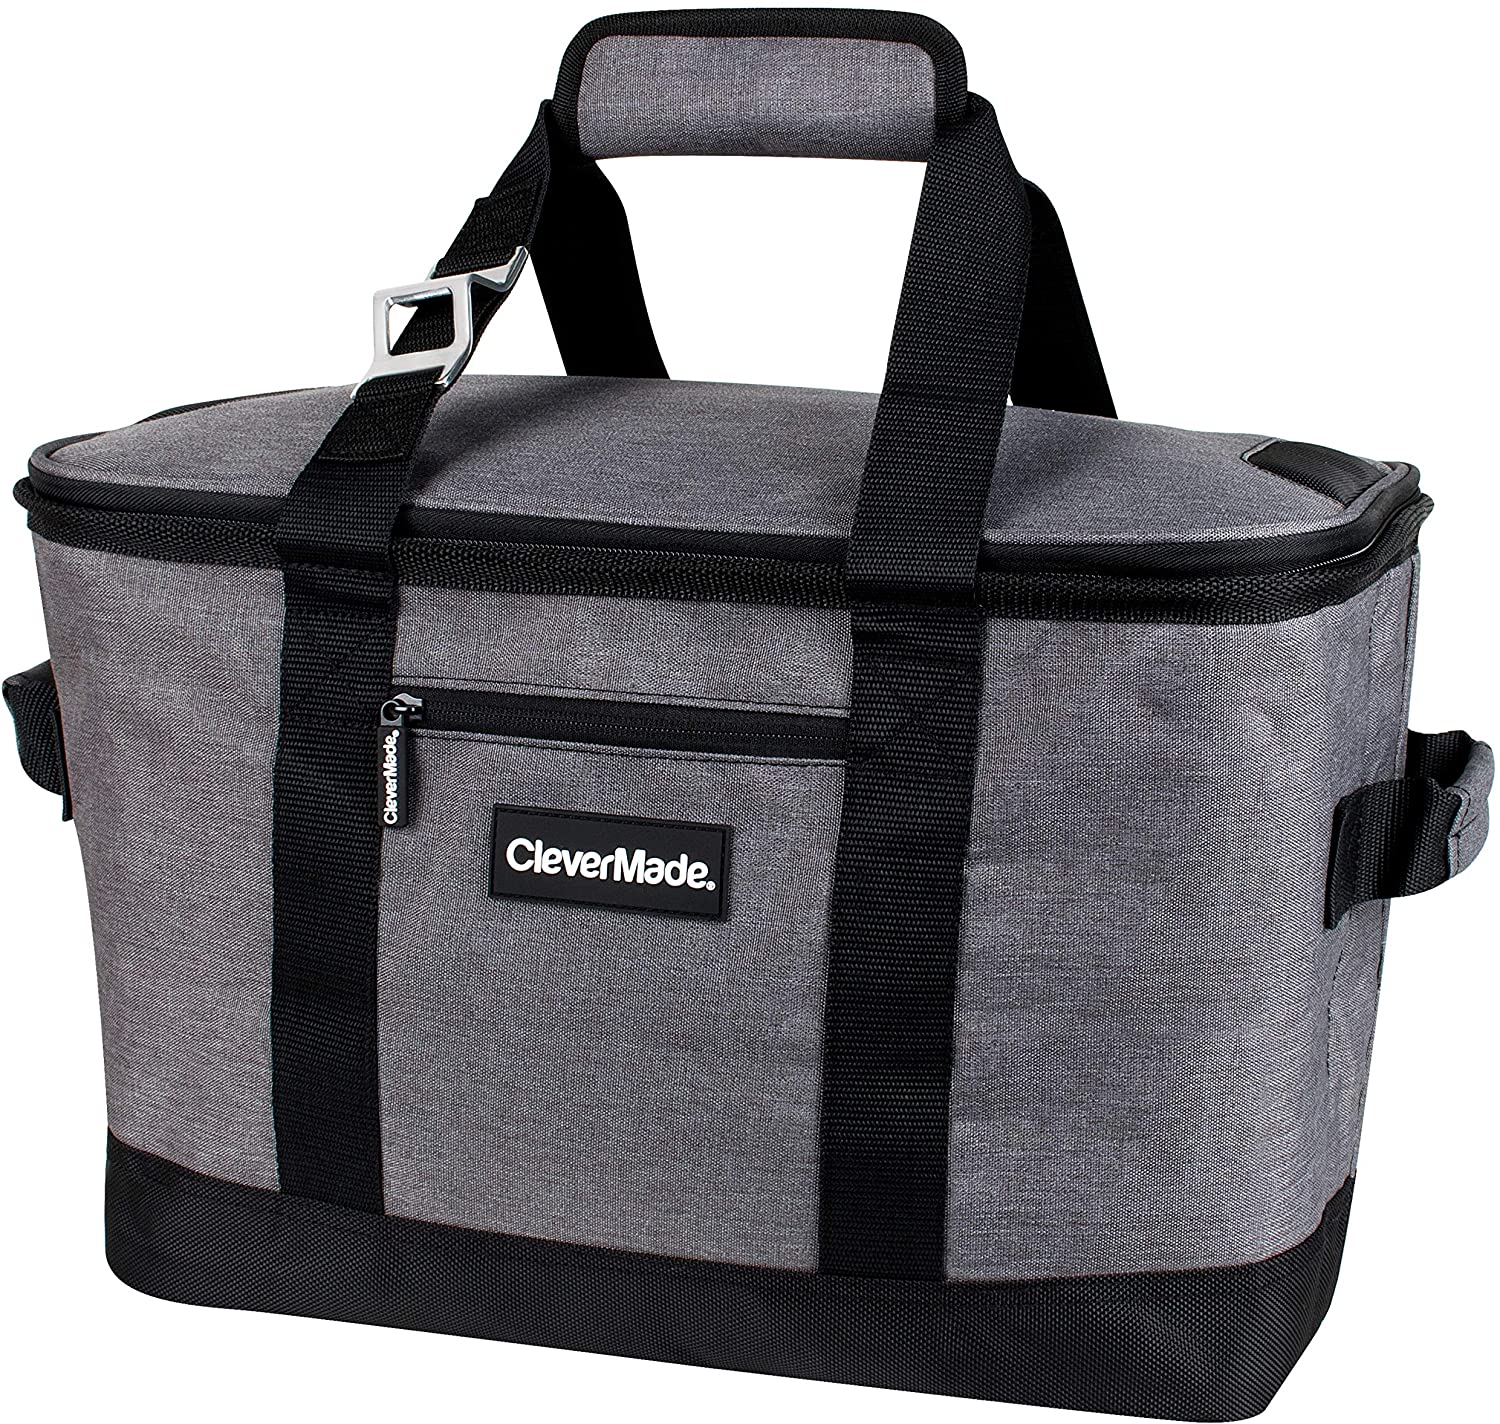 CleverMade Soft-Sided Collapsible Cooler Bag, 8-Gallon